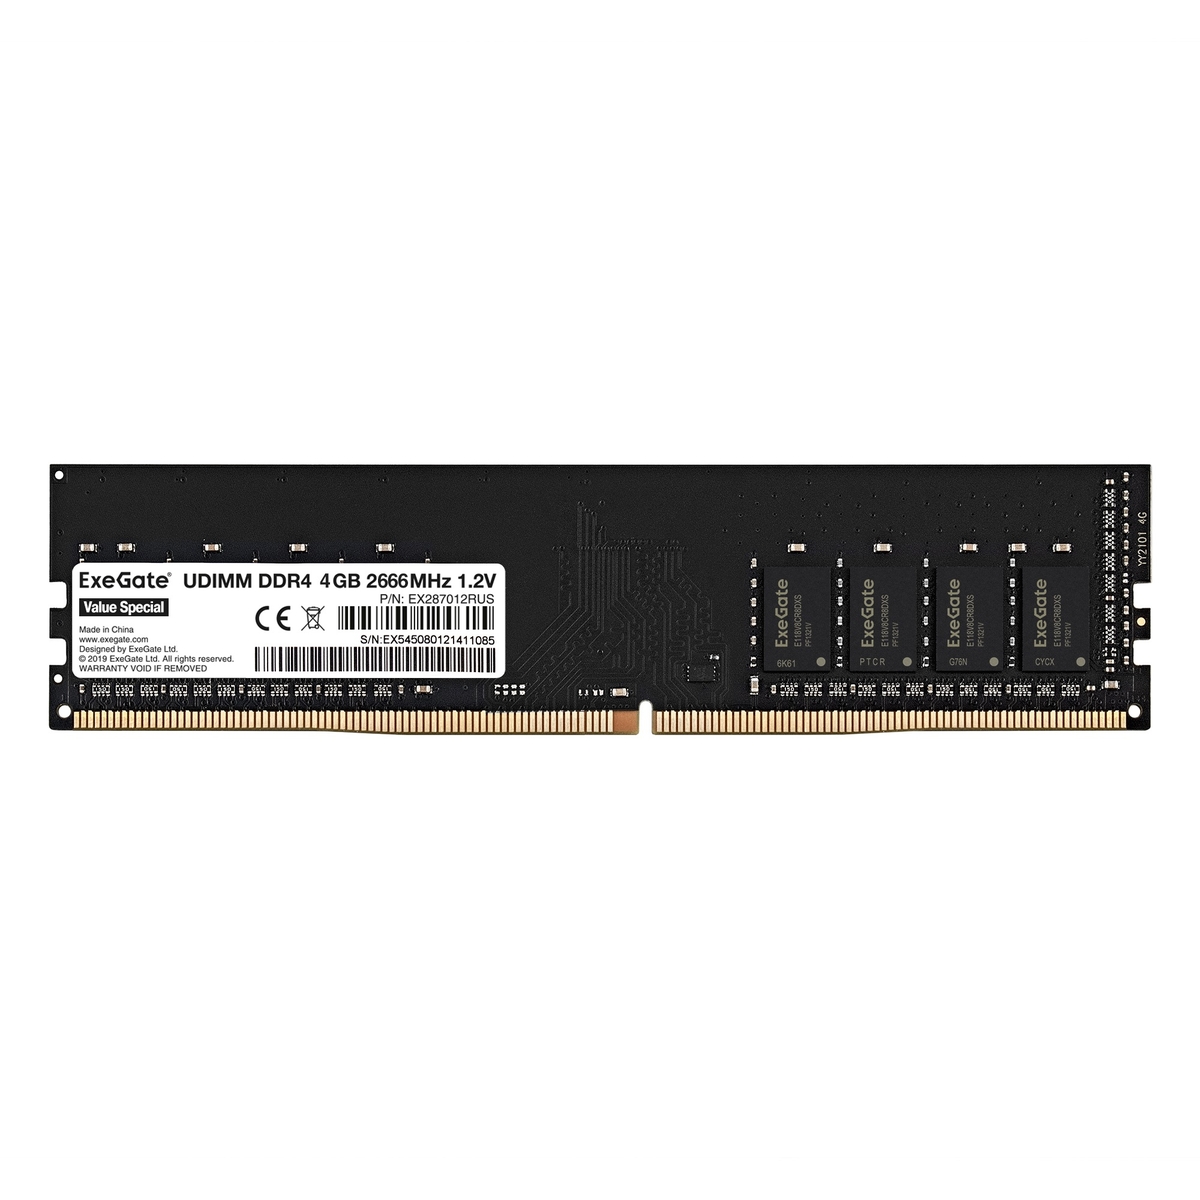 Value Special DIMM DDR4 4GB 2666MHz